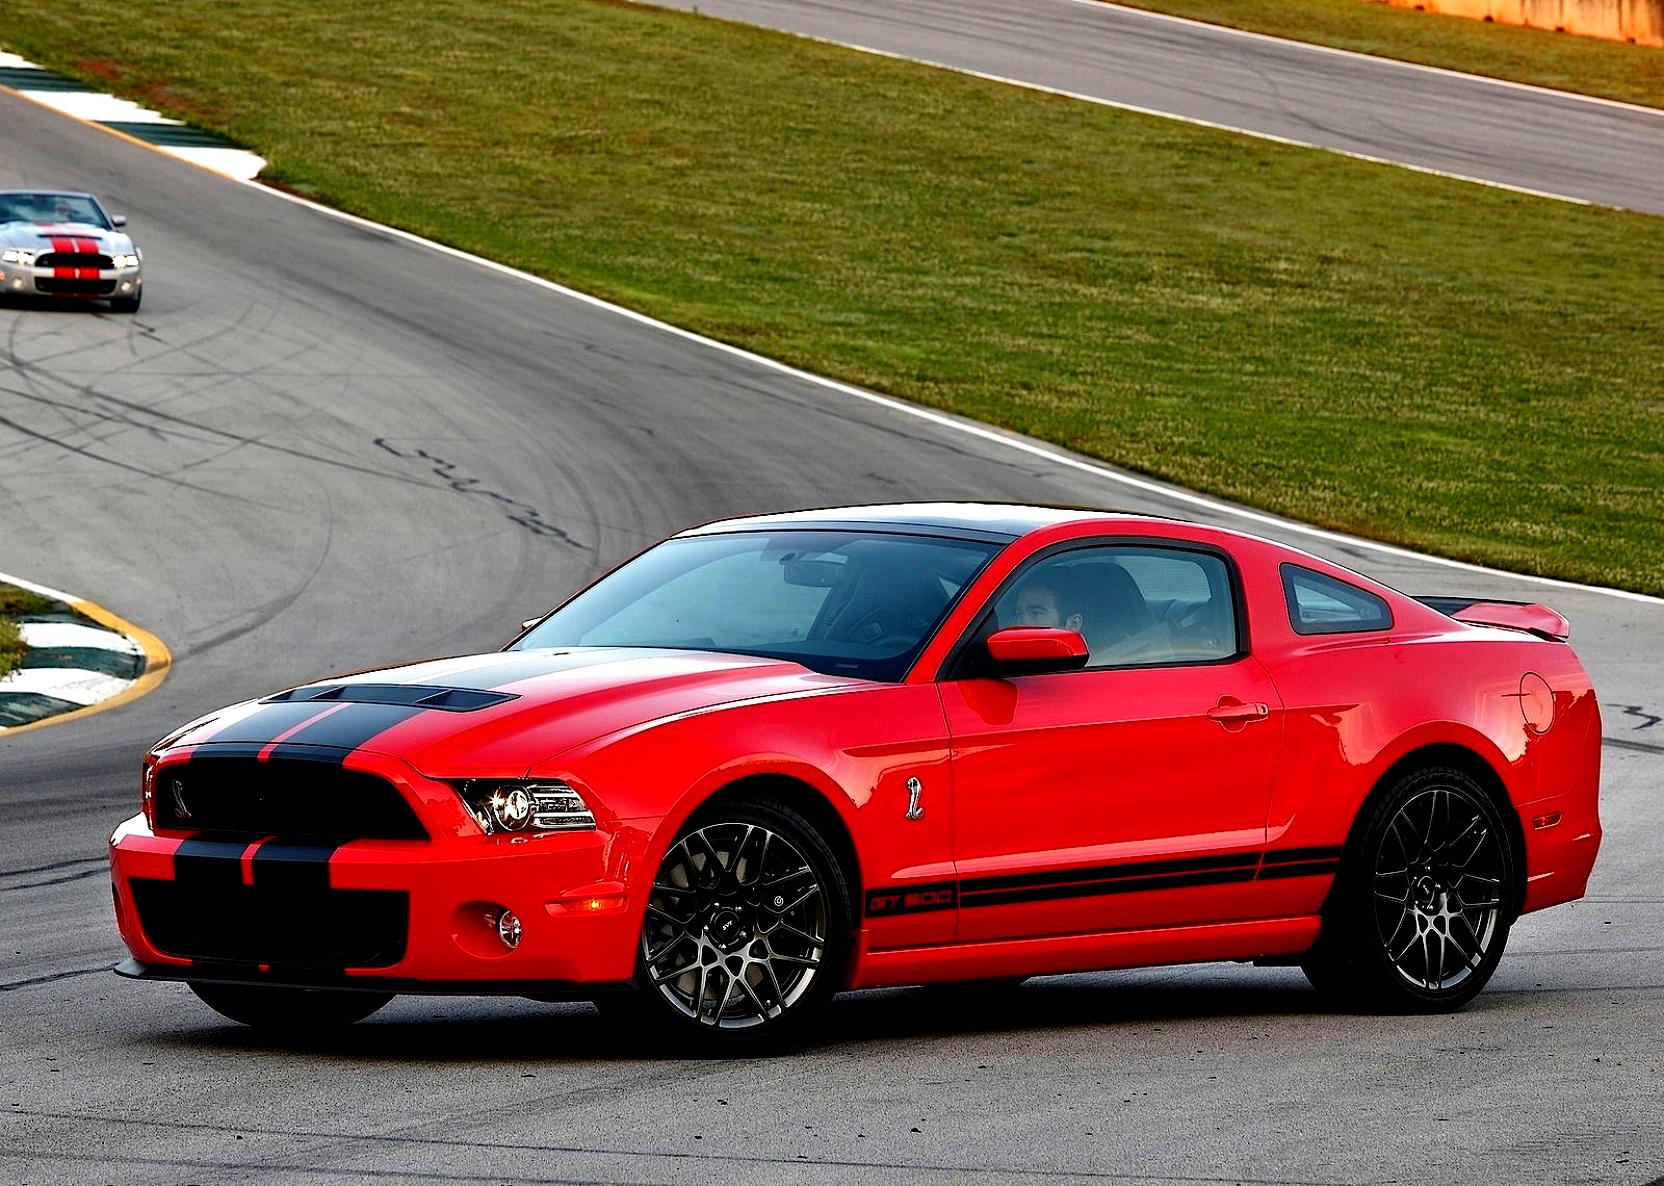 Ford Mustang Shelby GT500 2012 #24